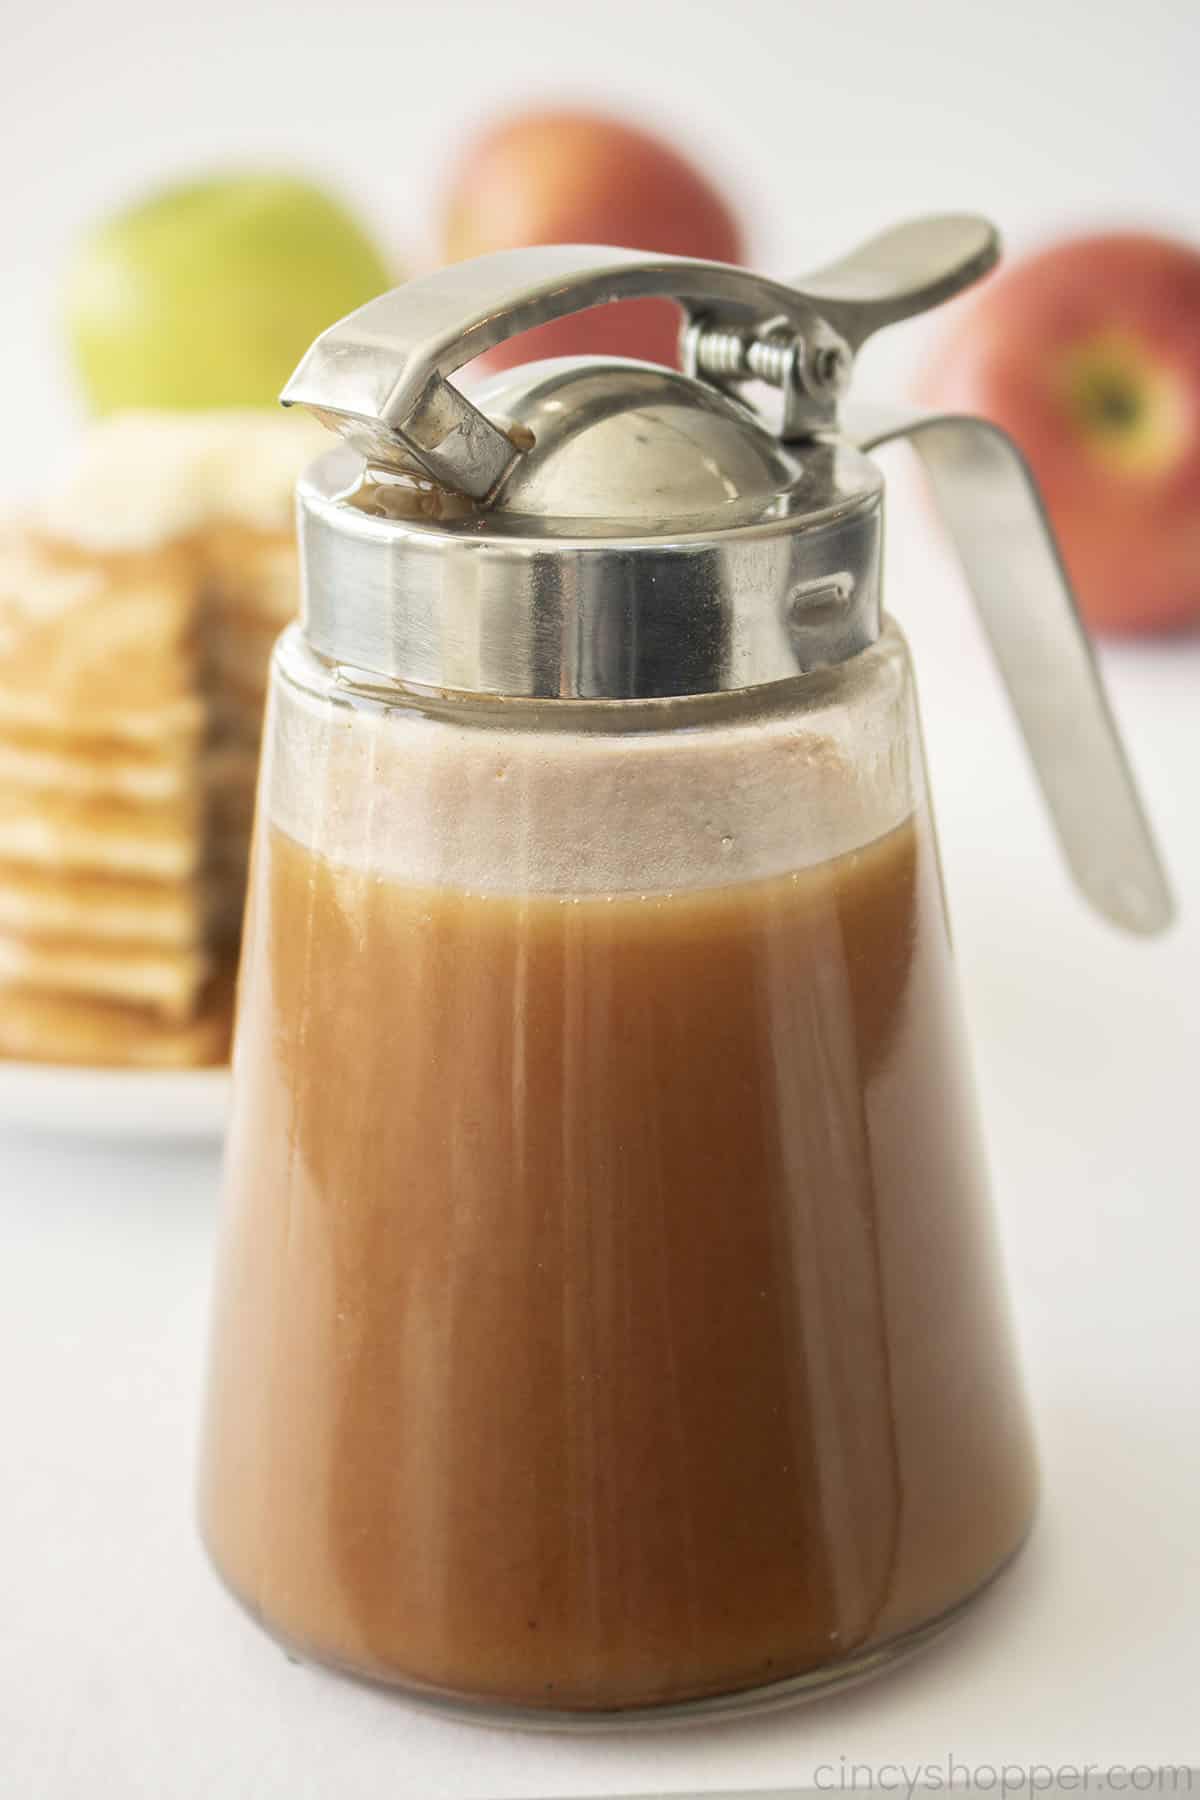 Apple Syrup in dispenser- apples in background.